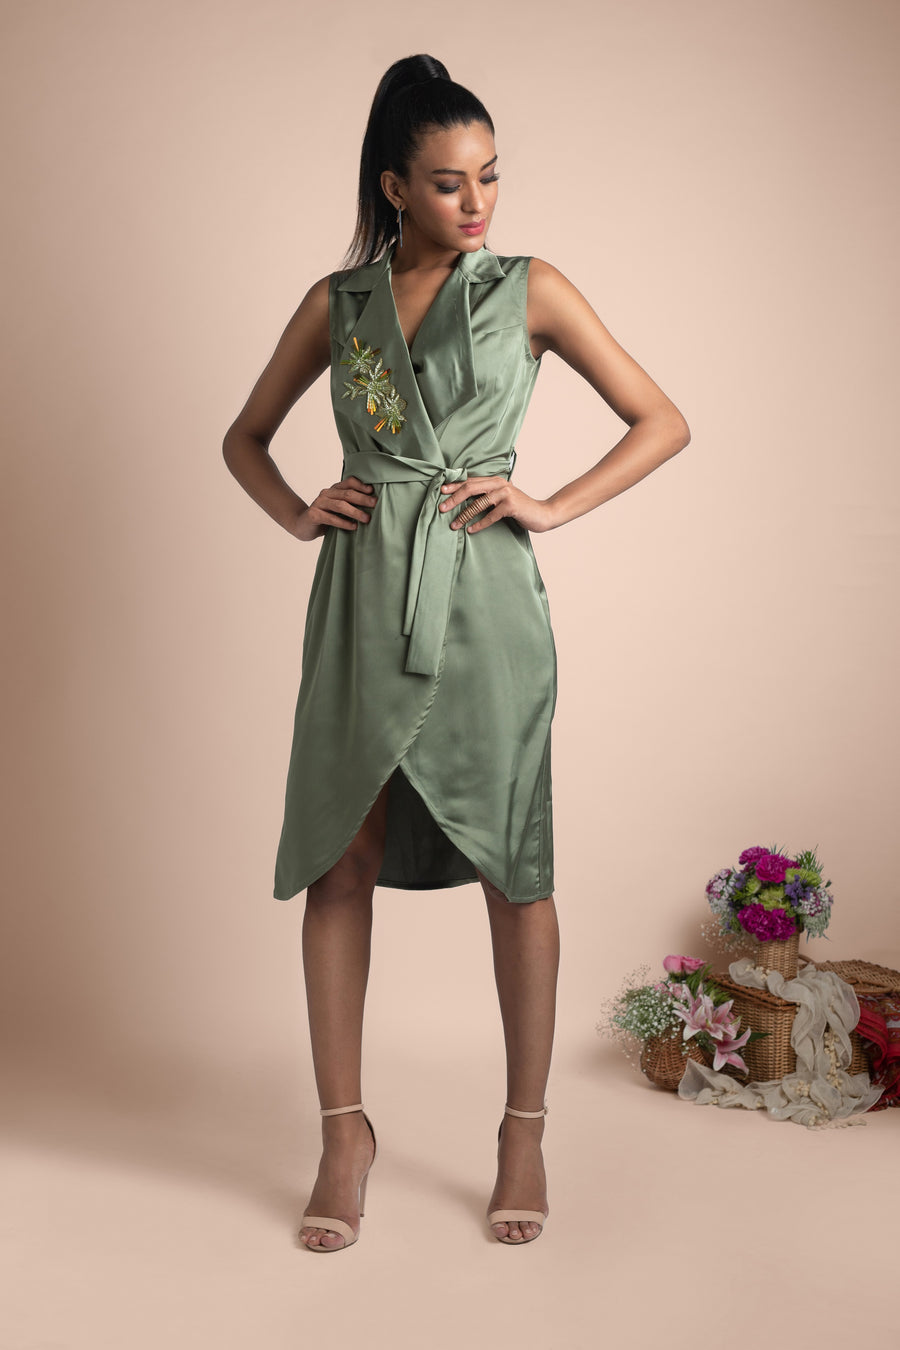 Mehak Murpana | Trench Dress | | Stylish formal and party wear.